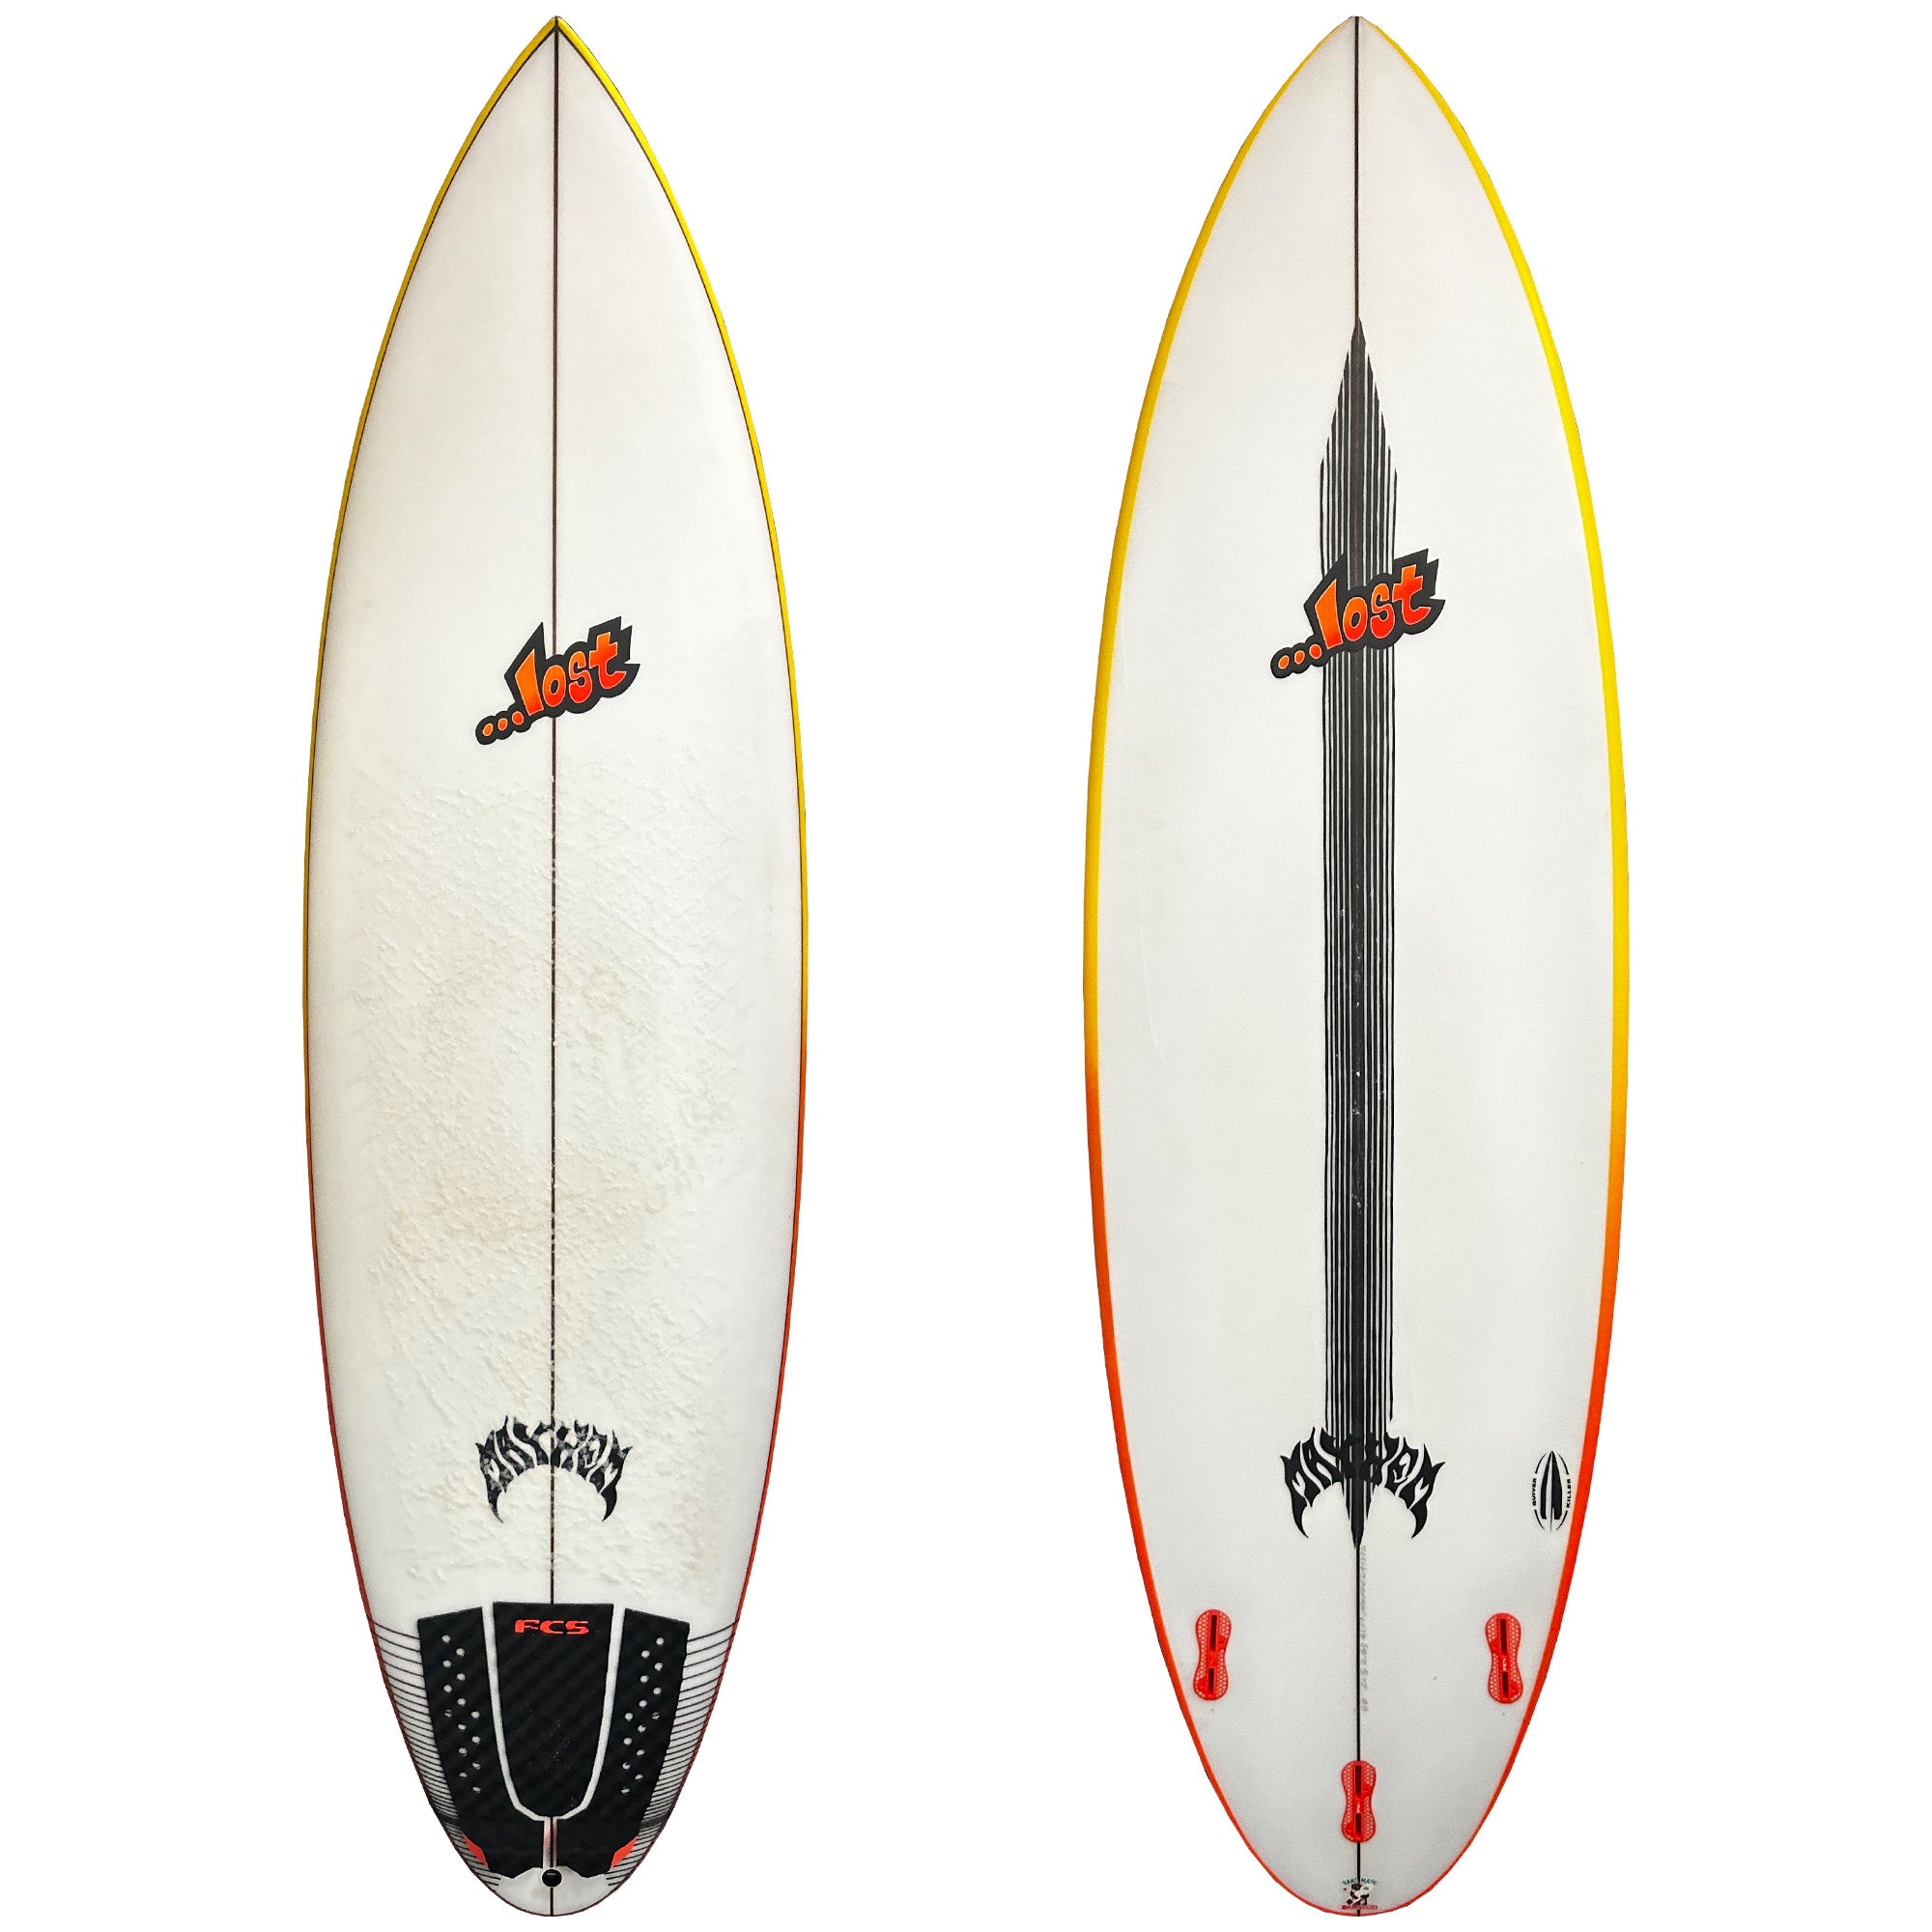 Lost Quiver Killer 6'6 Used Surfboard